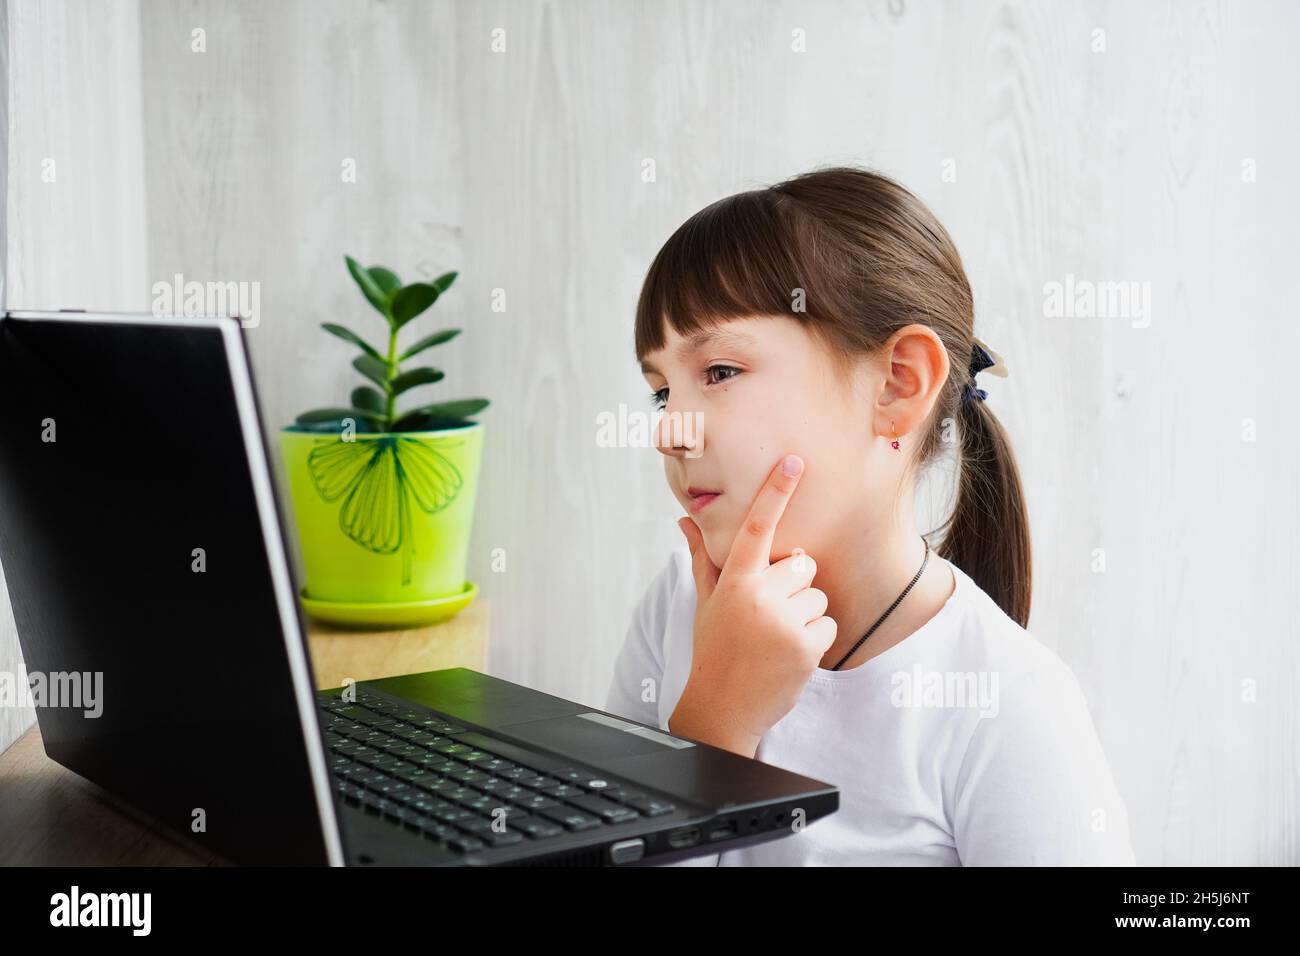 Indoor shot of cute dark haired female child looking at notebook thoughtfully with hand on face Stock Photo